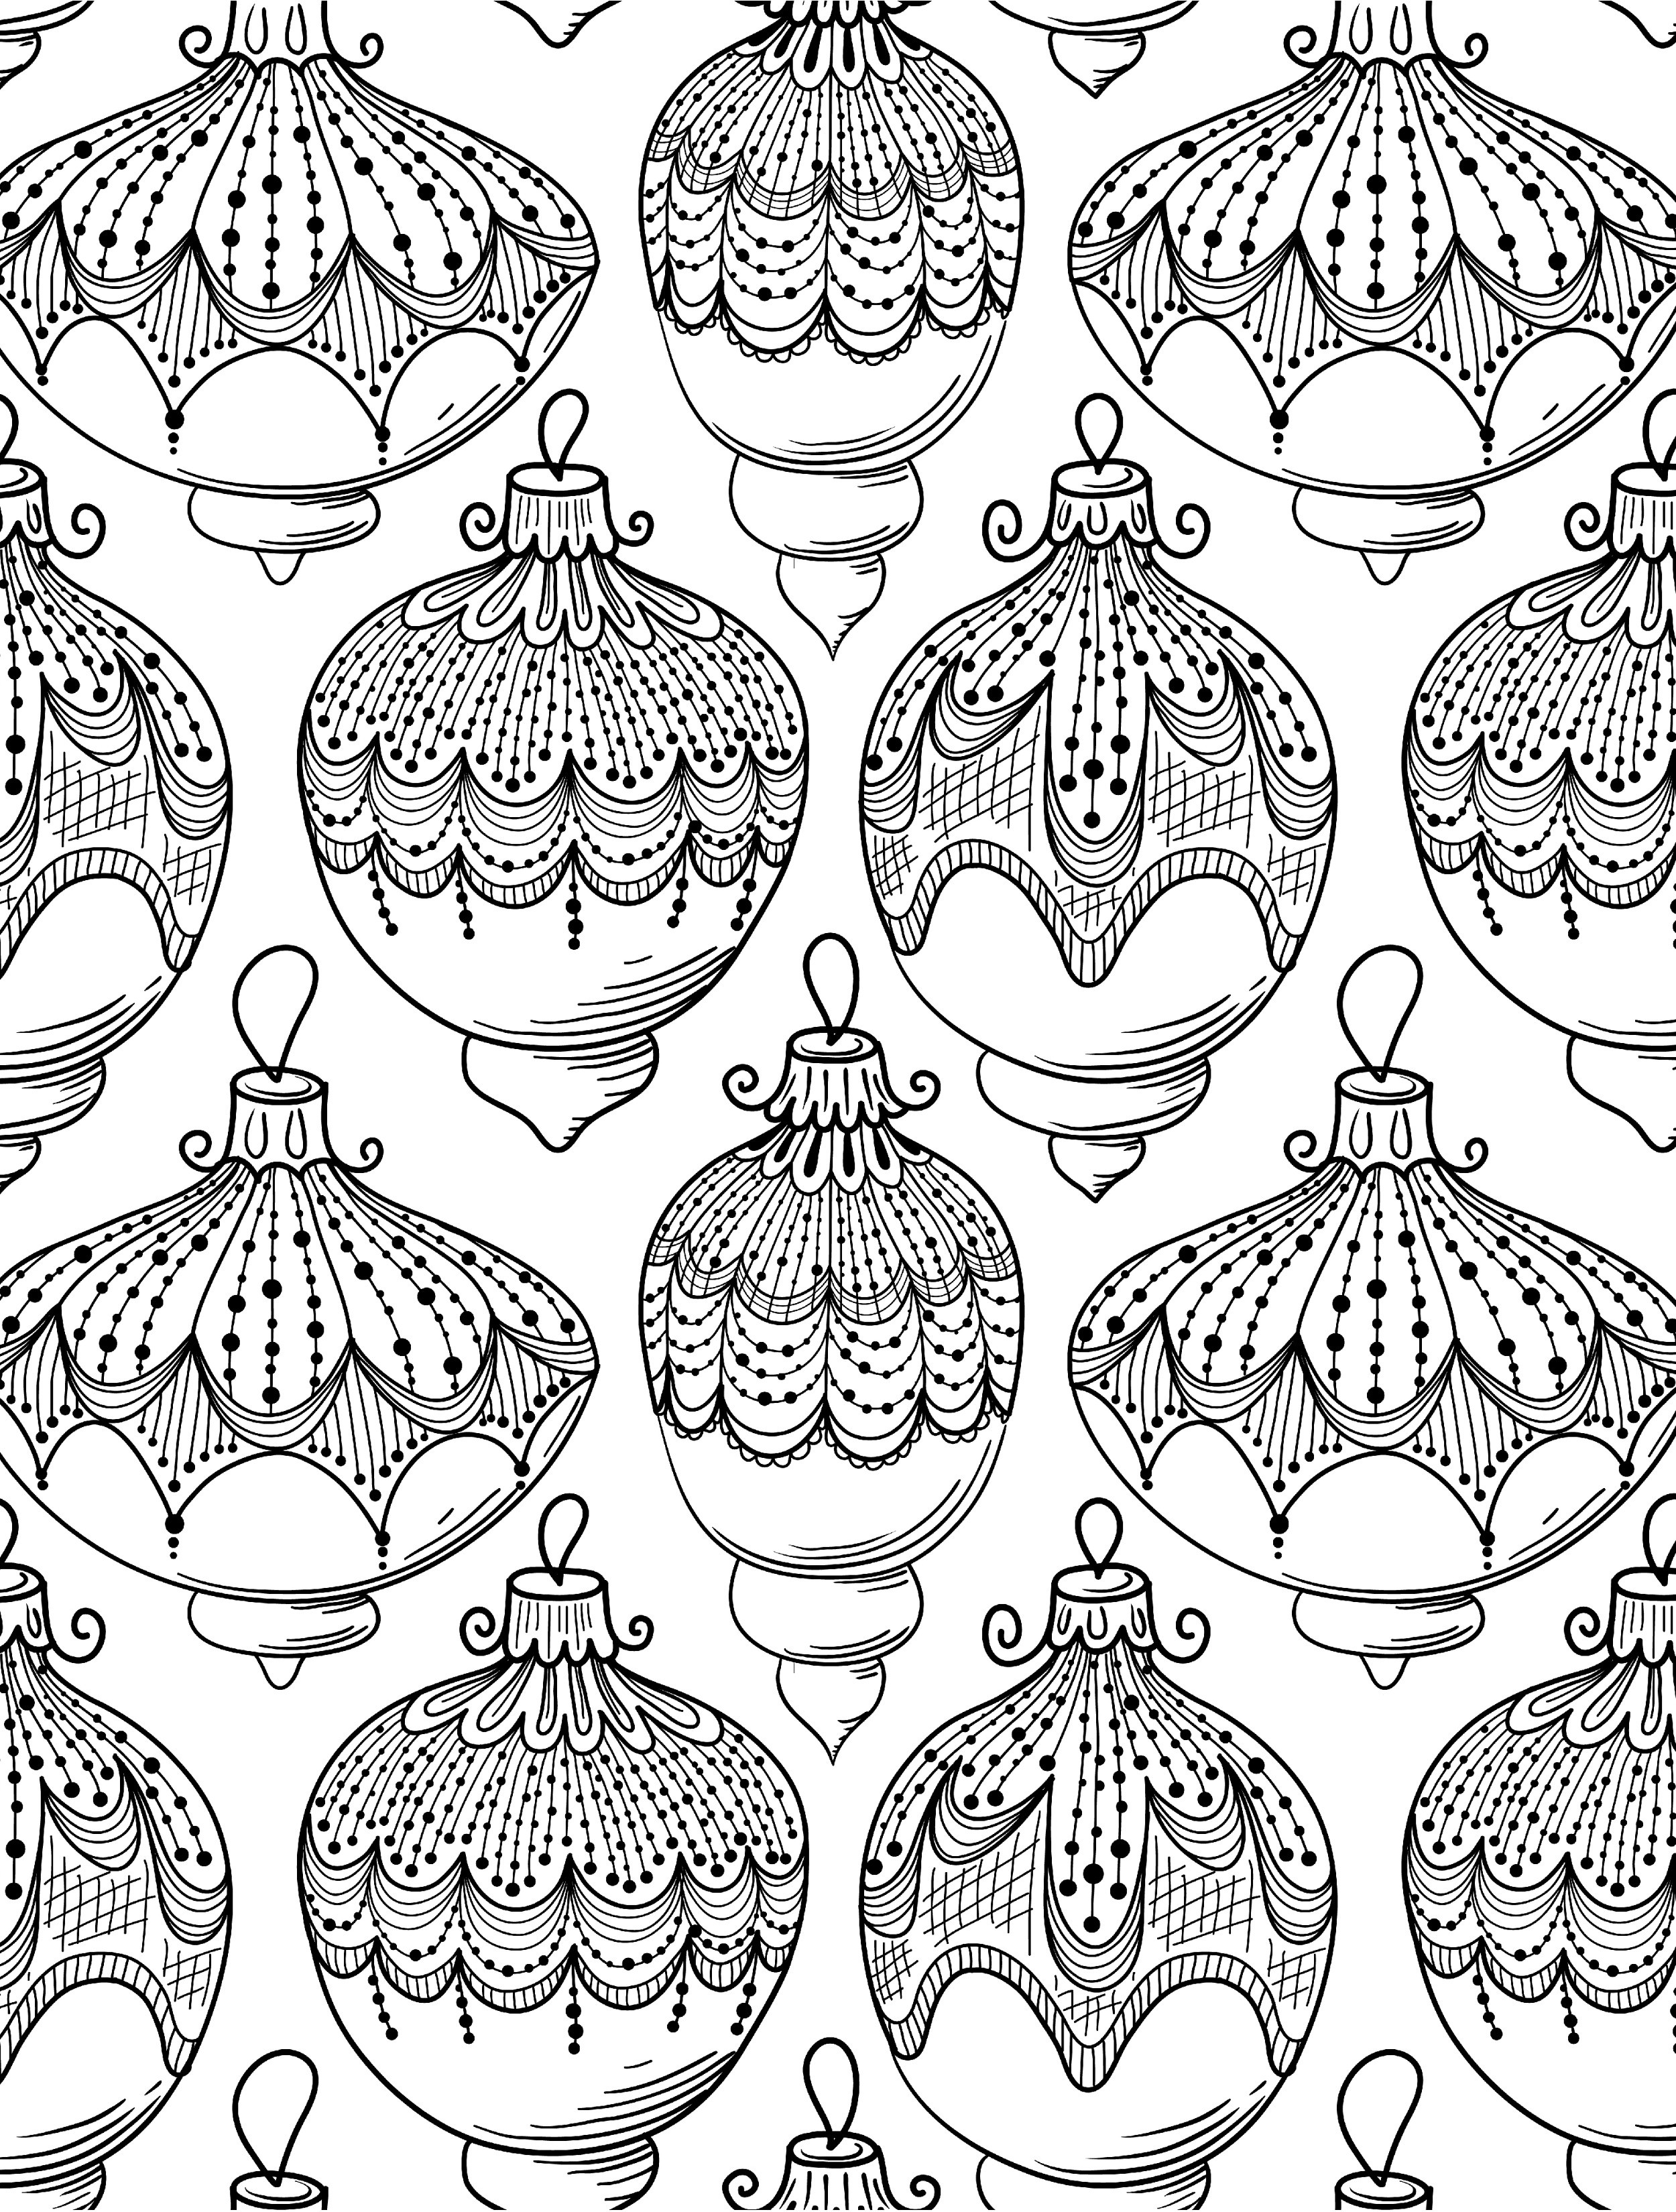 Printable Coloring Pages Adults Free
 Coloring Pages for Adults Free Printable 42 Collections